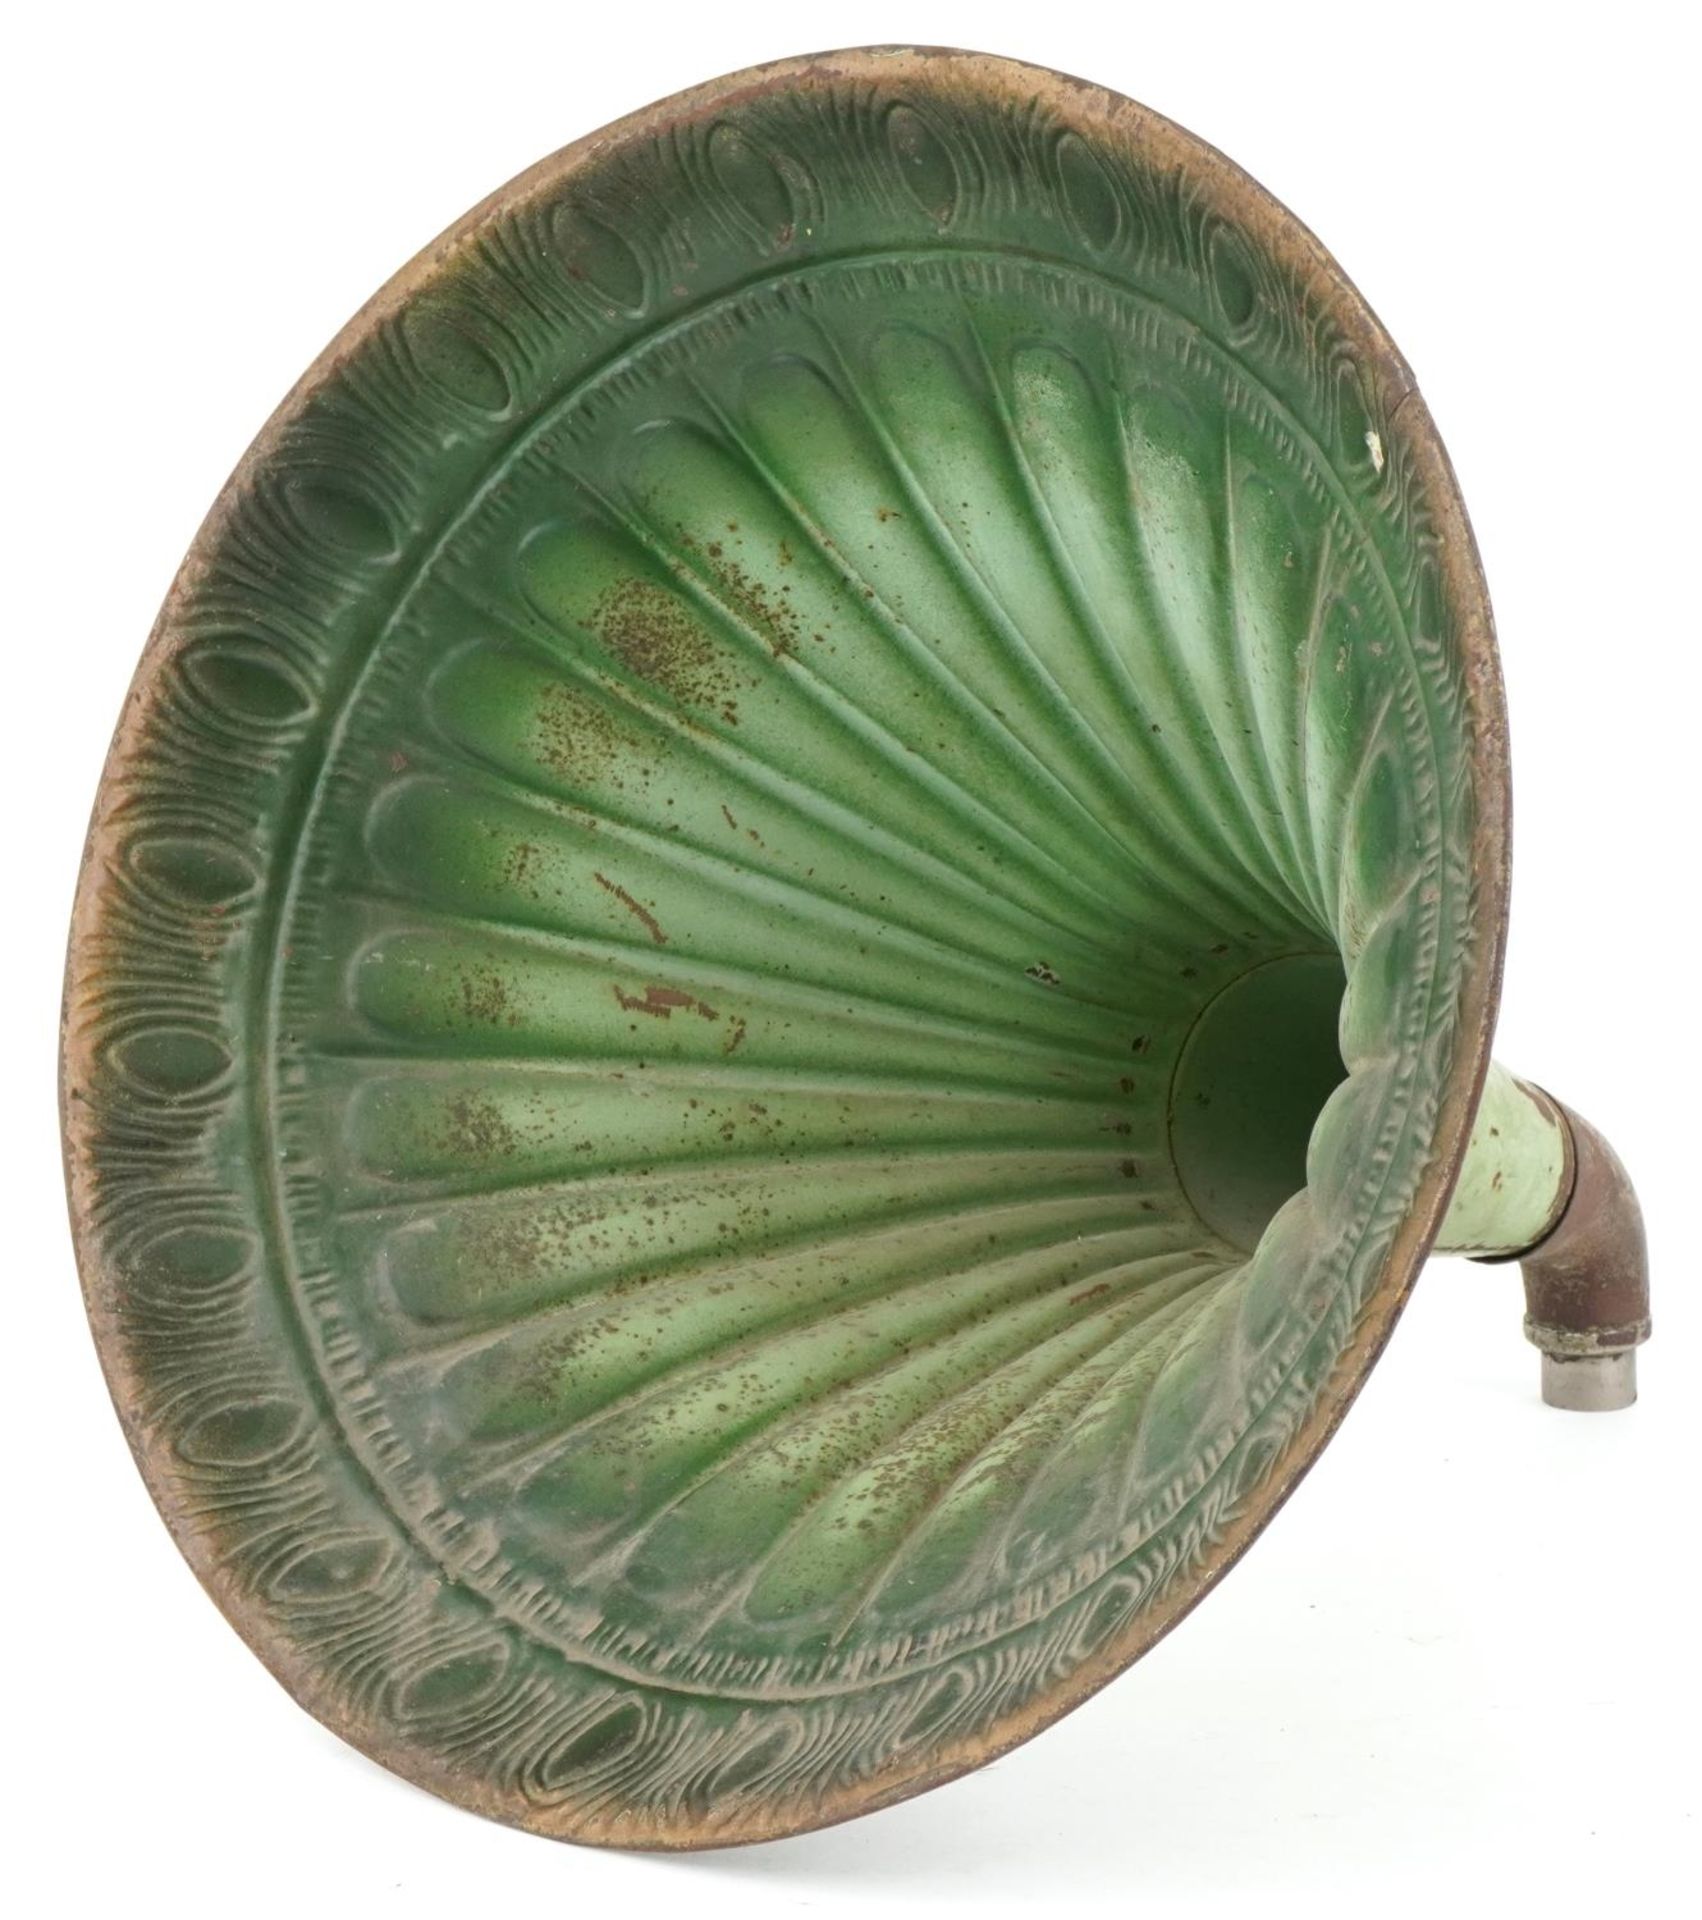 Vintage tin gramophone horn, 51.5cm in length : For further information on this lot please visit